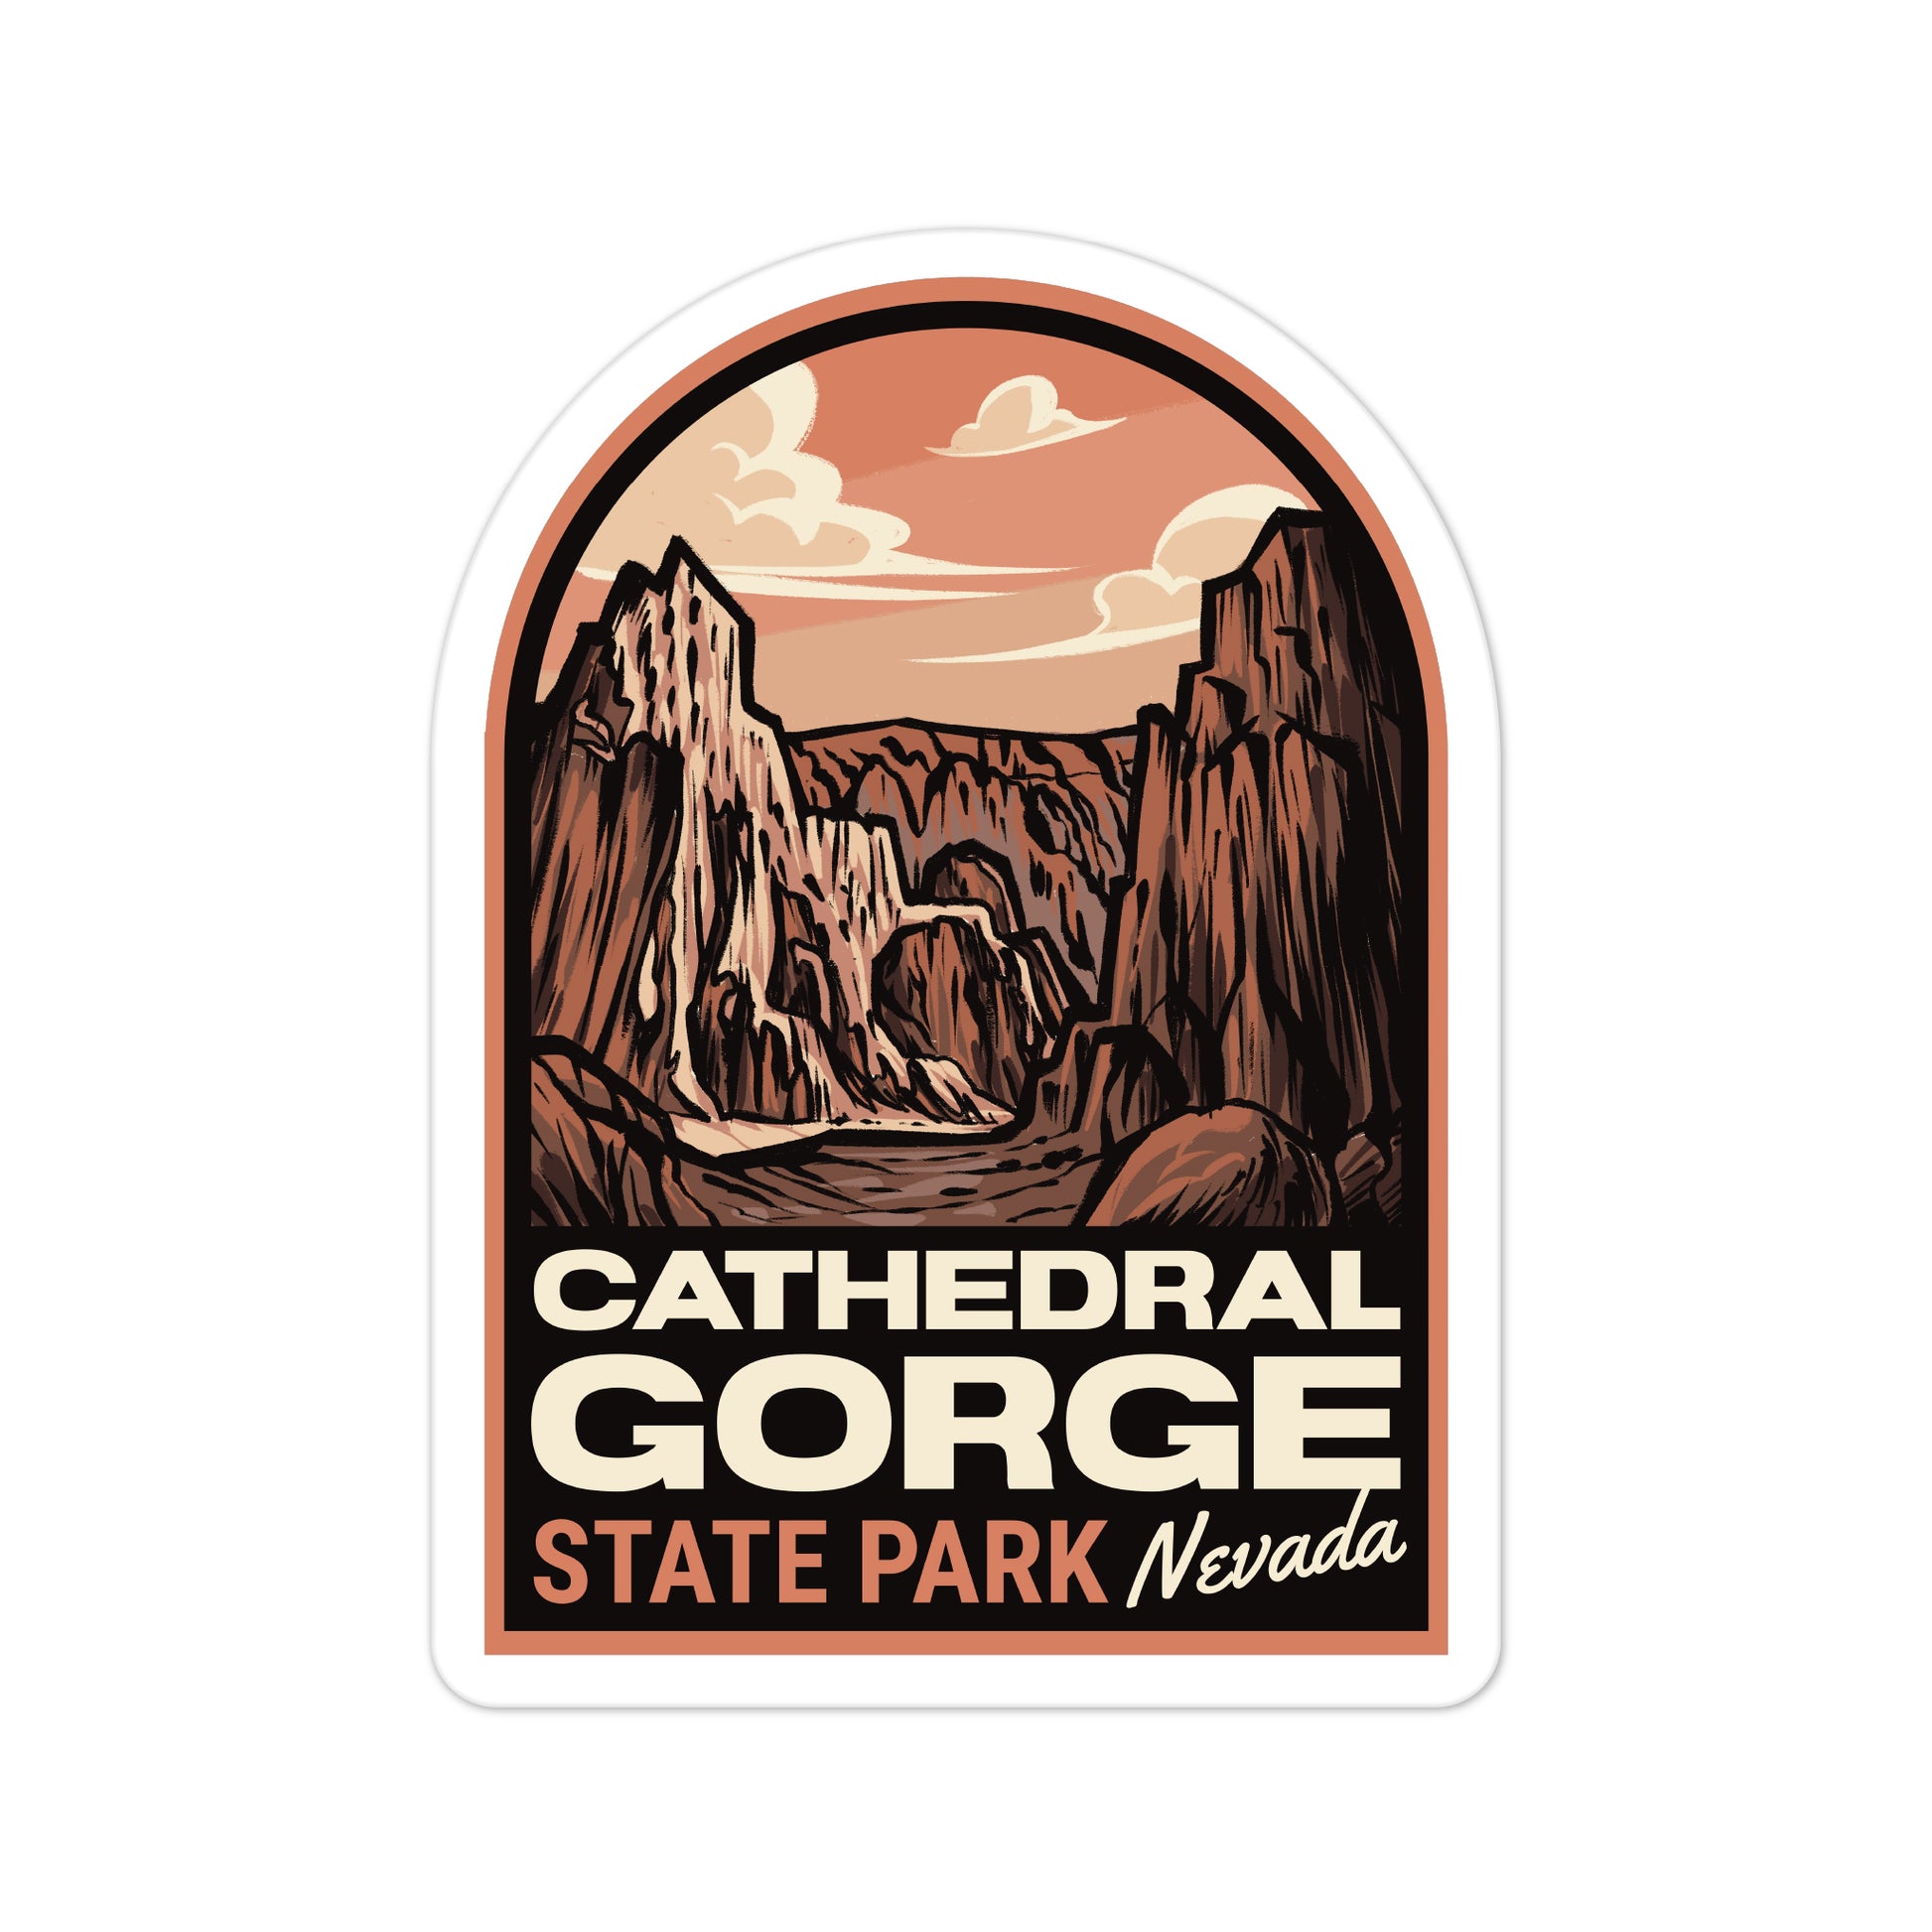 A sticker of Cathedral Gorge State Park